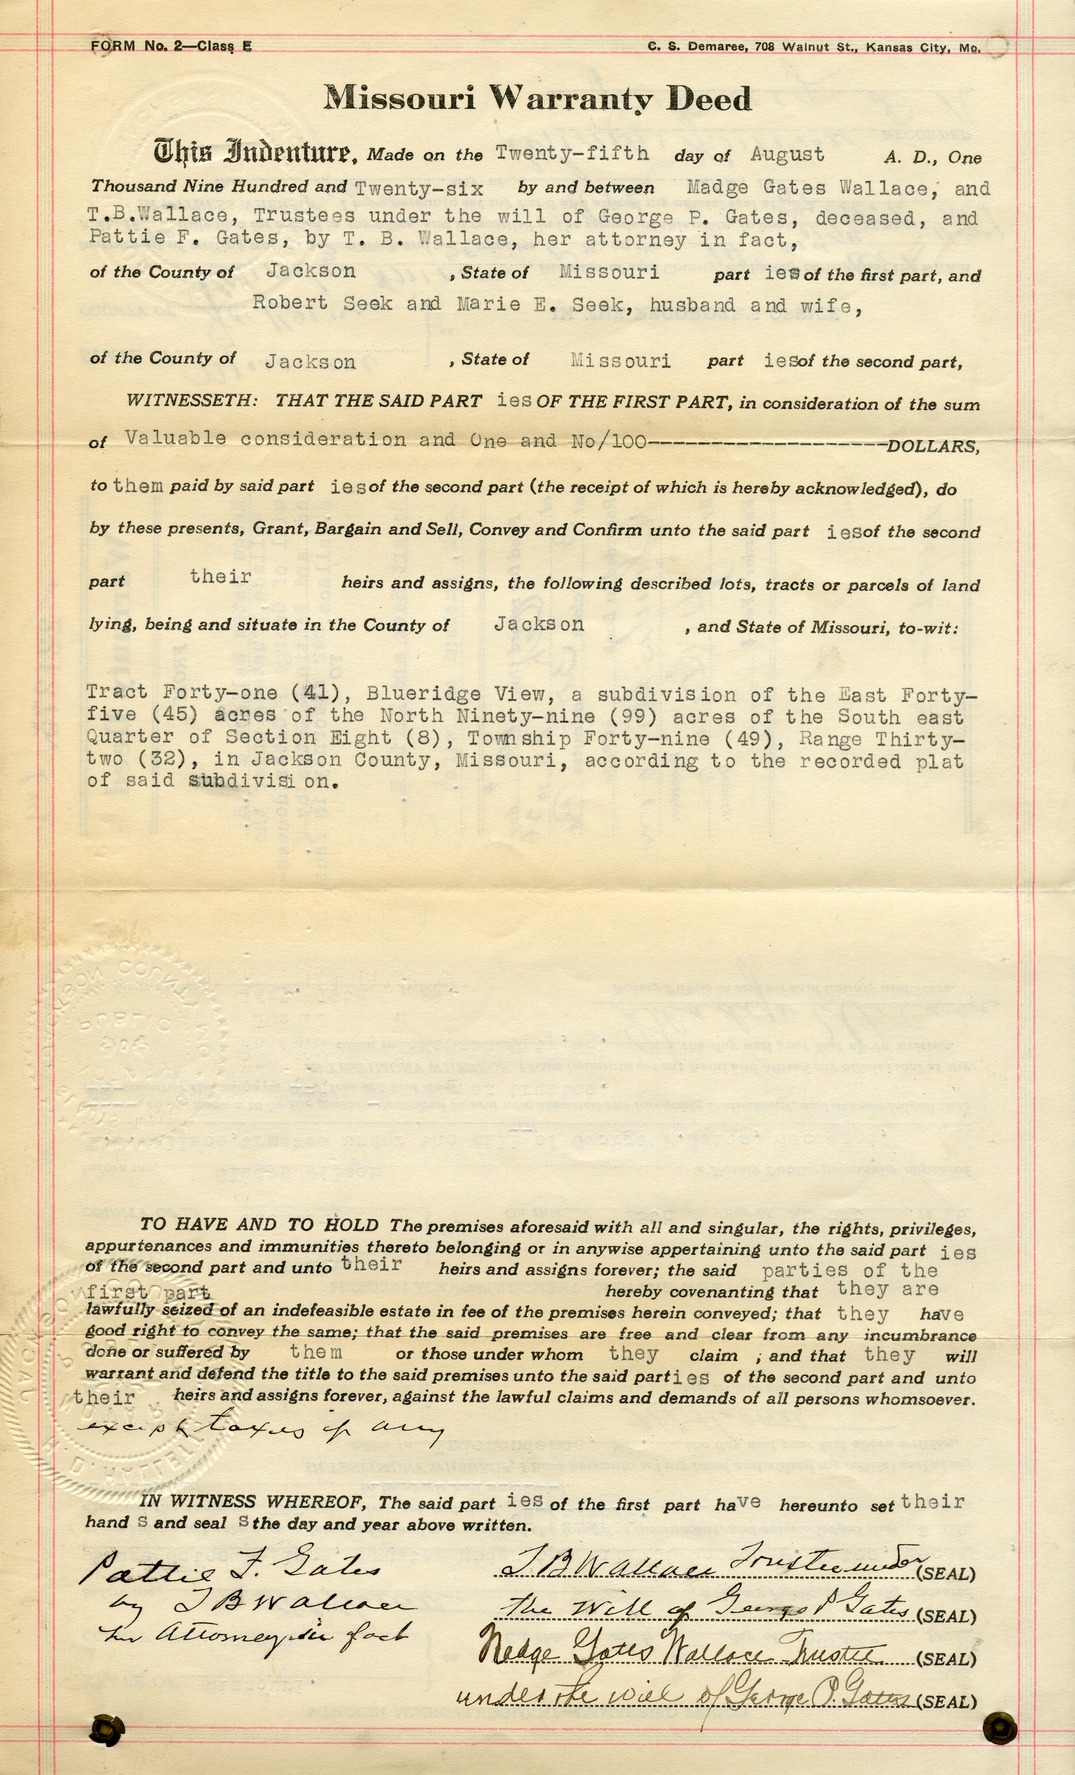 Warranty Deed from Madge Gates Wallace et al. to Robert and Marie E. Seek